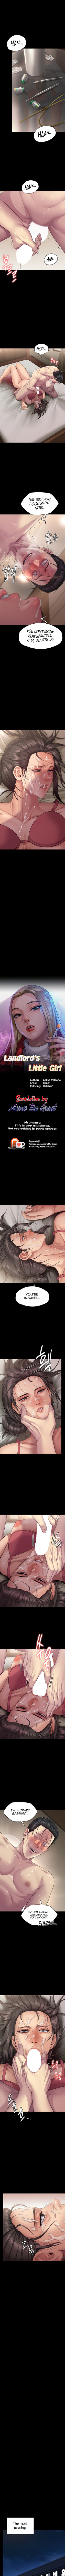 Panel Image 1 for chapter 275 of manhwa Queen Bee on read.oppai.stream